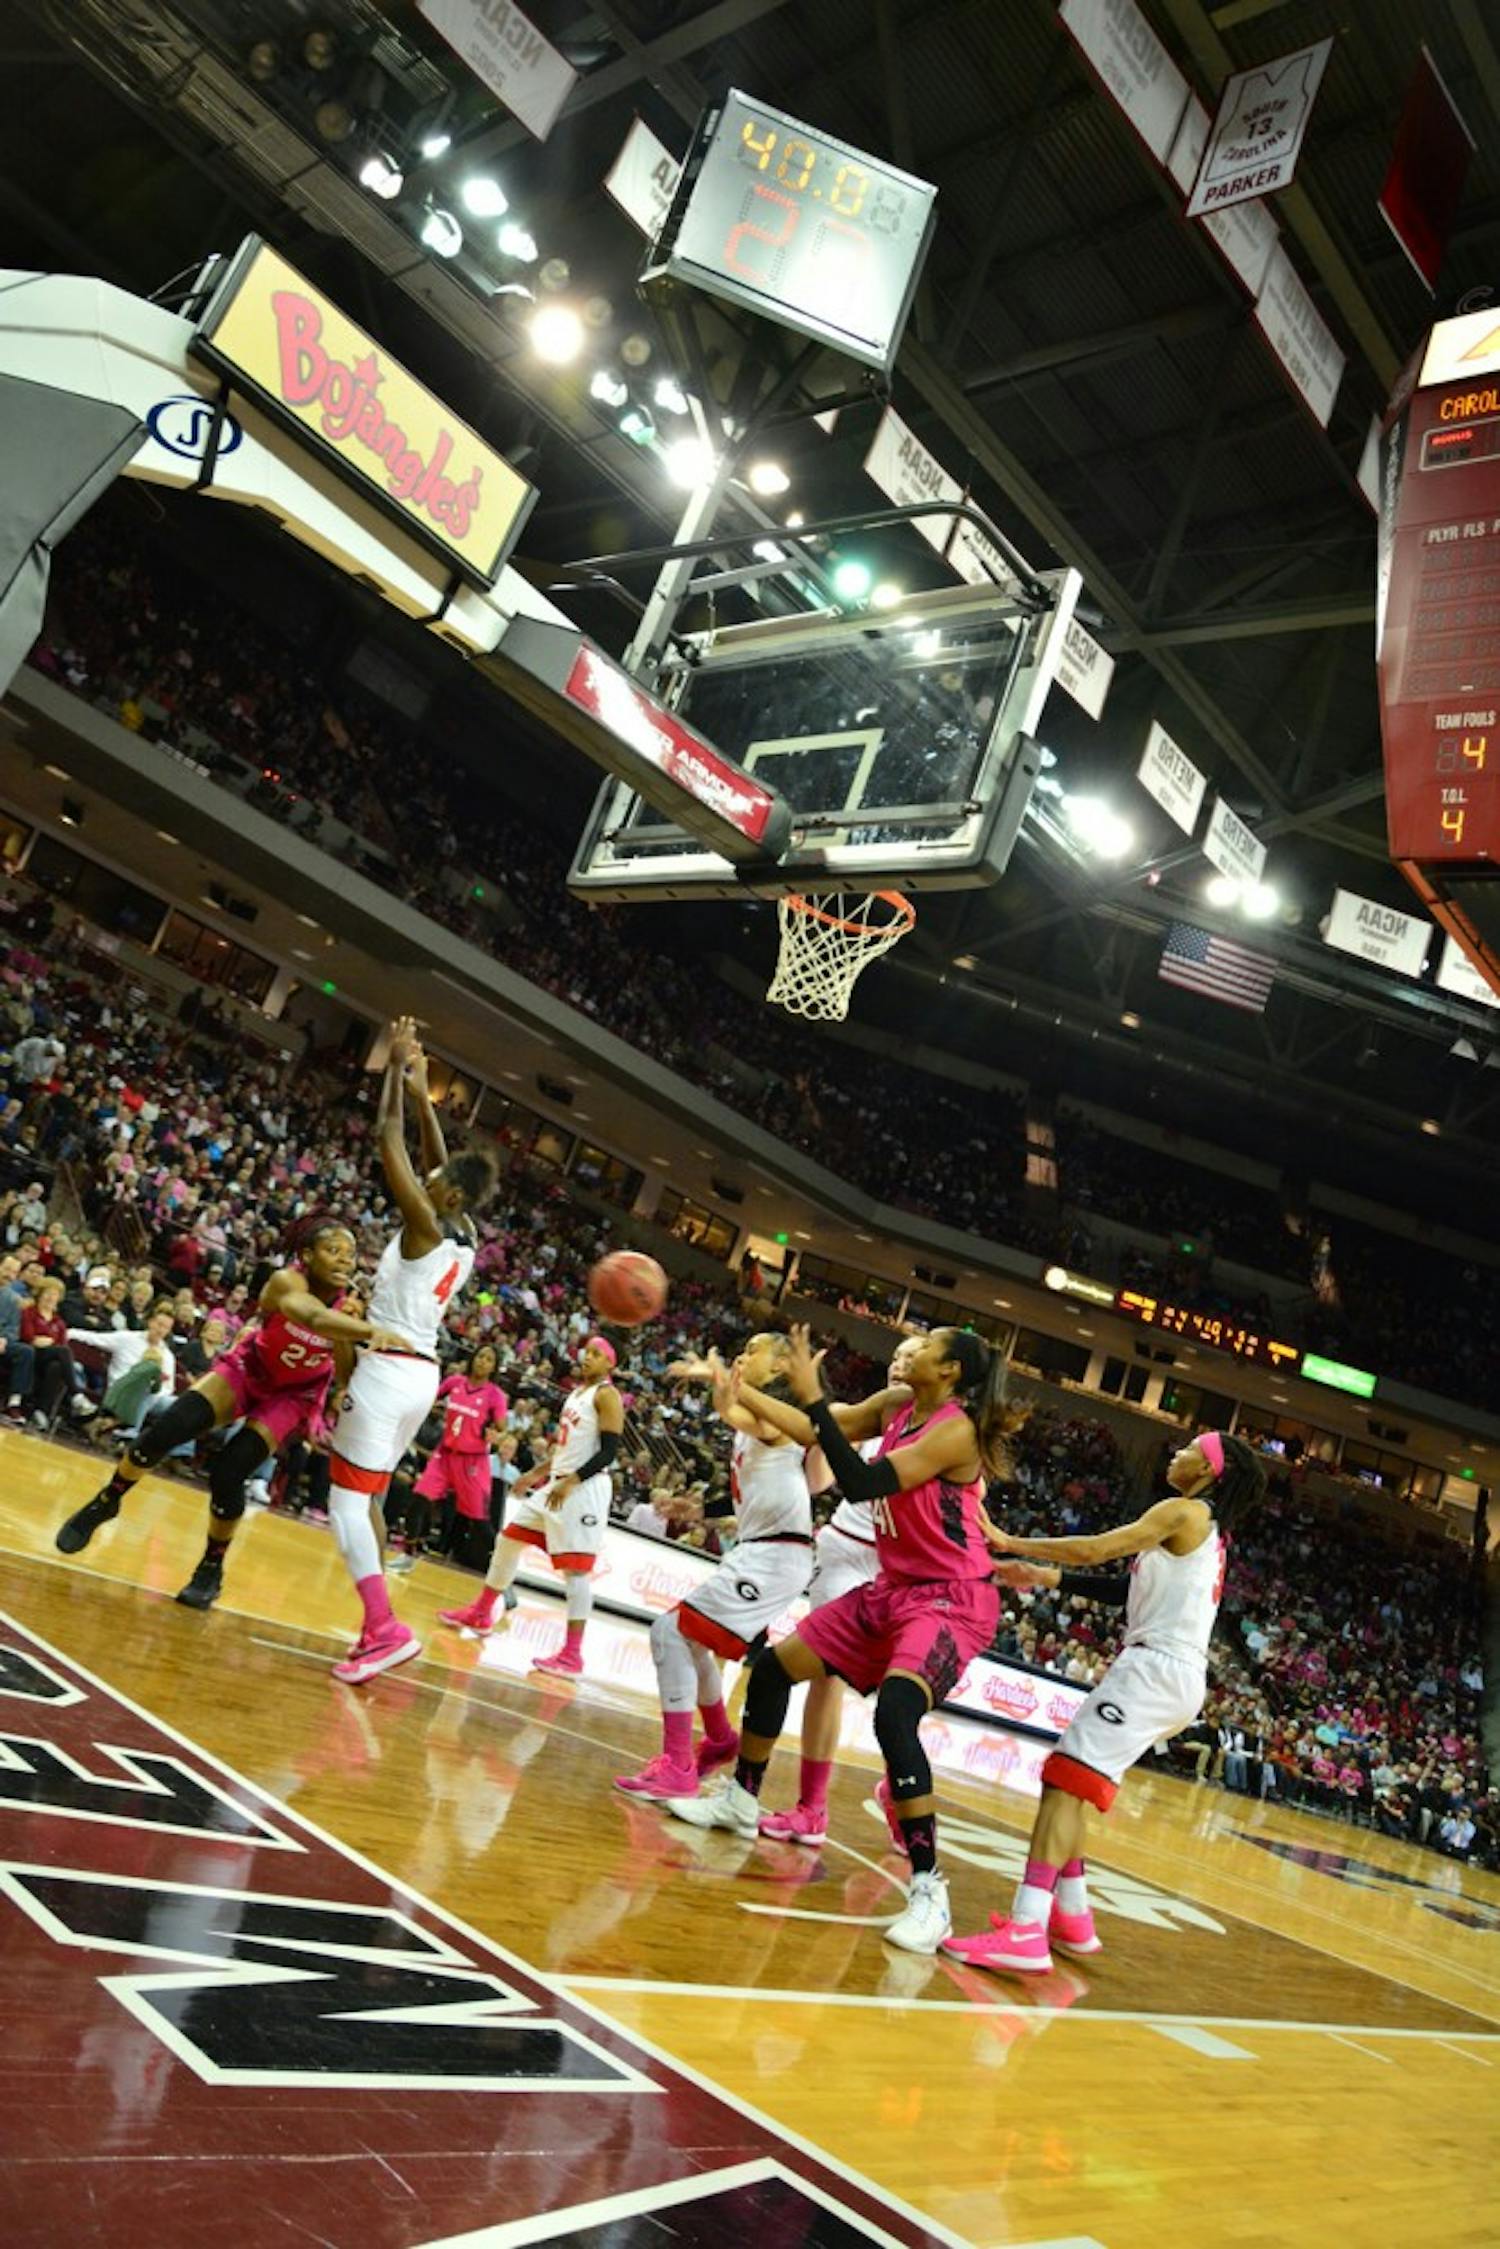 Lady Gamecock Sarah Imovbioh (24) passes to teammate Alaina Coates (41) as the game erupts into adrenaline and chaos in only the opening minutes of the first quarter. South Carolina Gamecocks vs Georgia Bulldogs. Colonial Life Arena, Columbia, SC. February 18, 2016